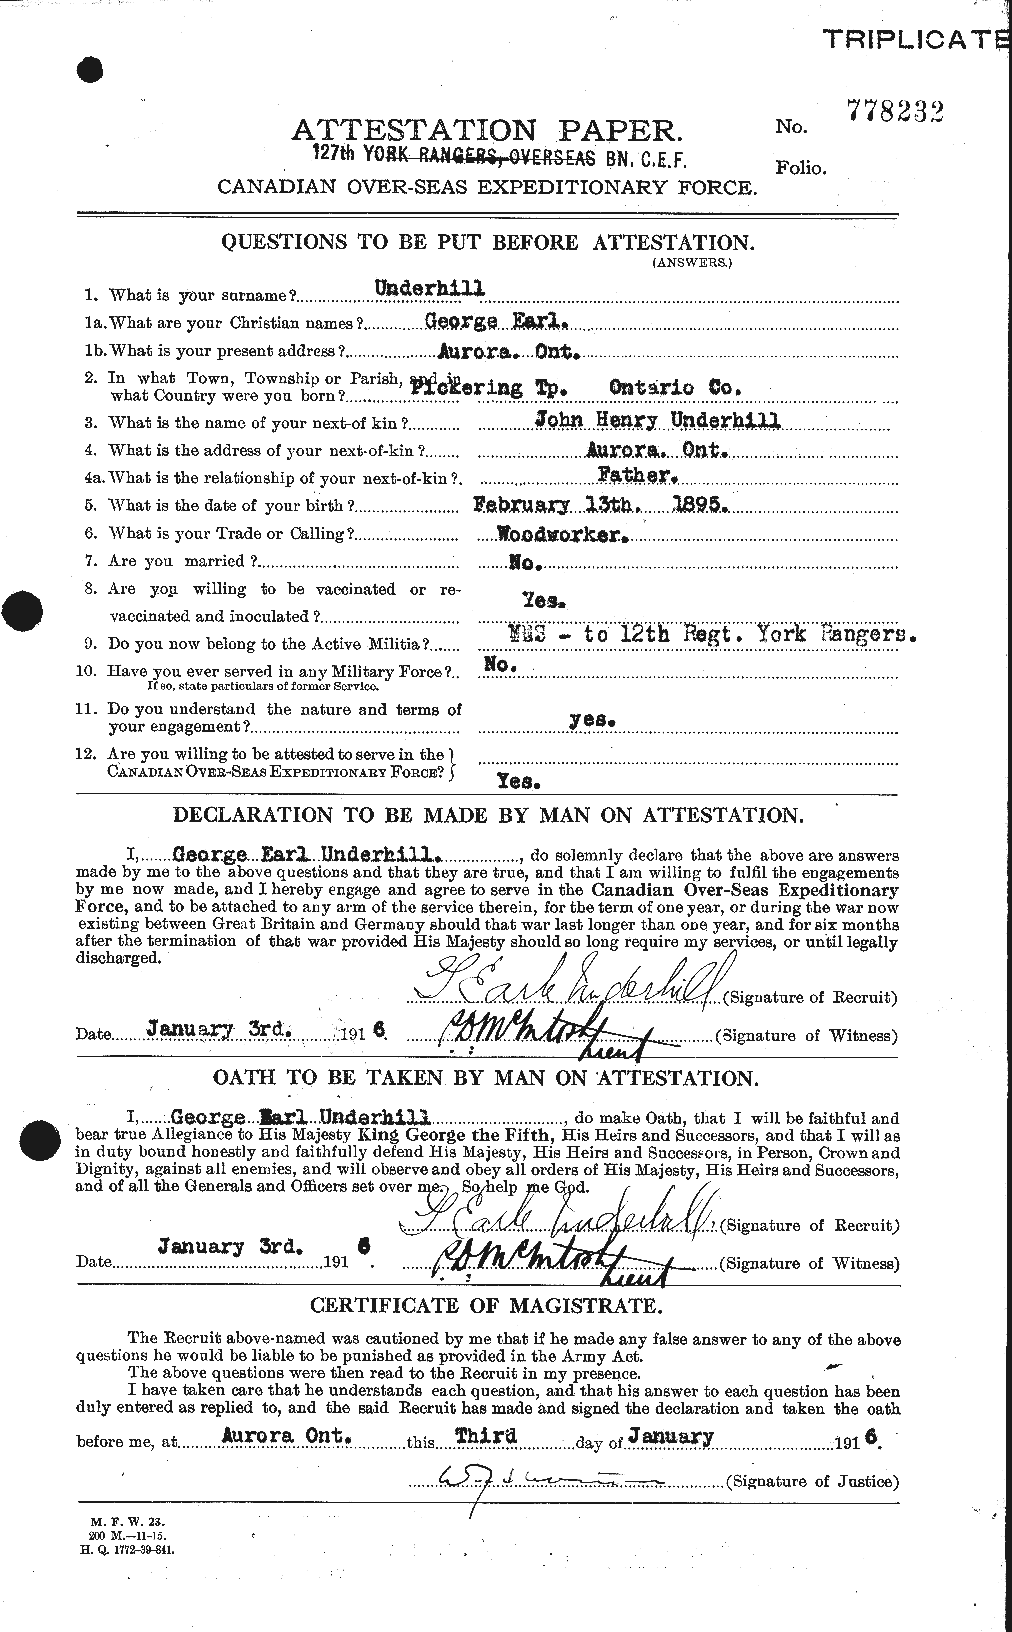 Personnel Records of the First World War - CEF 647088a